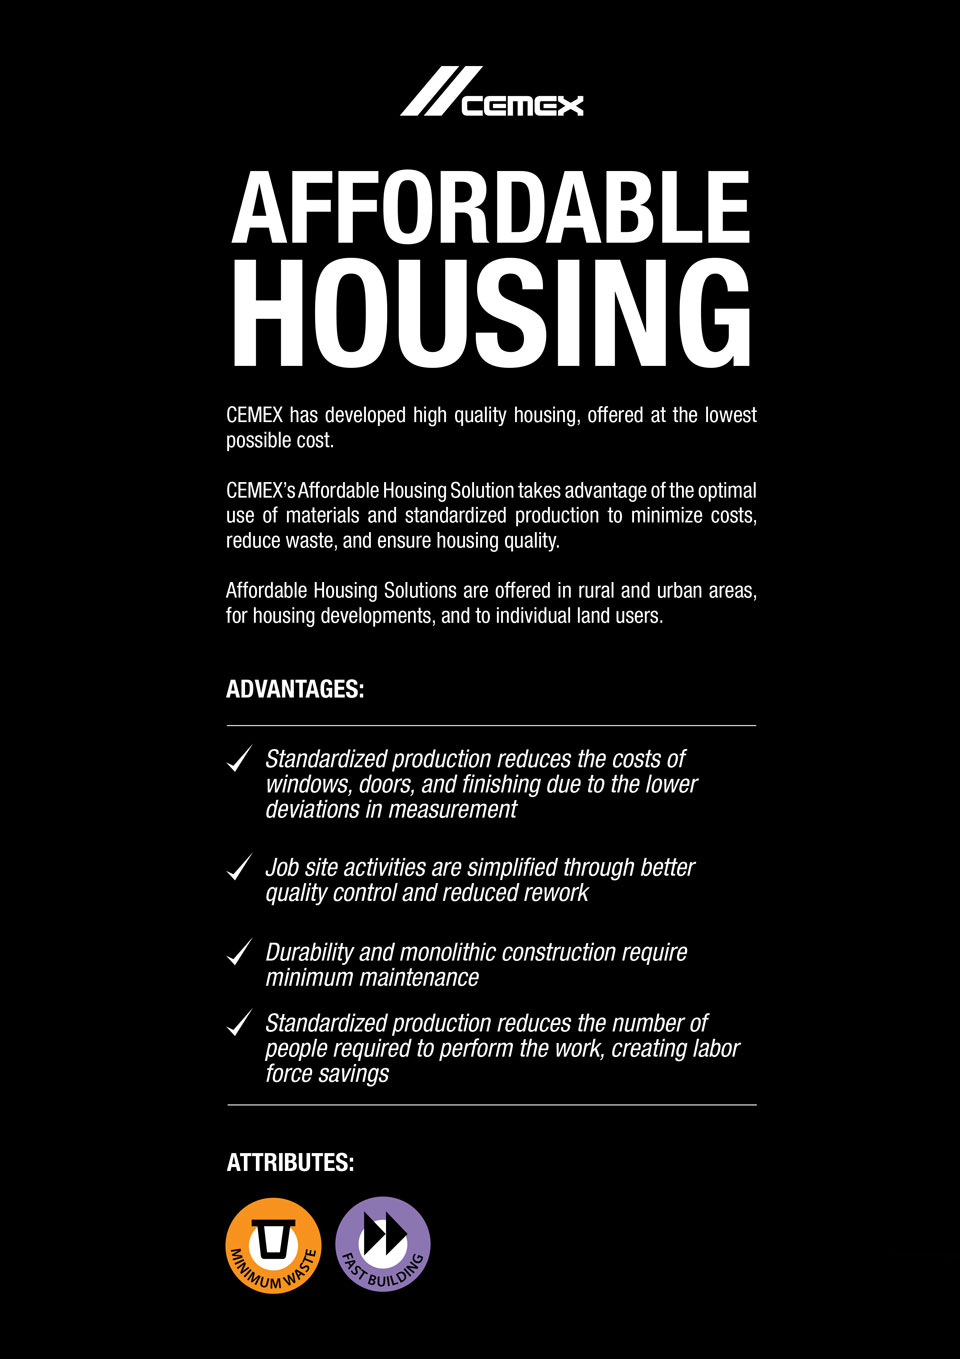 An image describing the advanages and characteristics of the Affordable Housing solution.